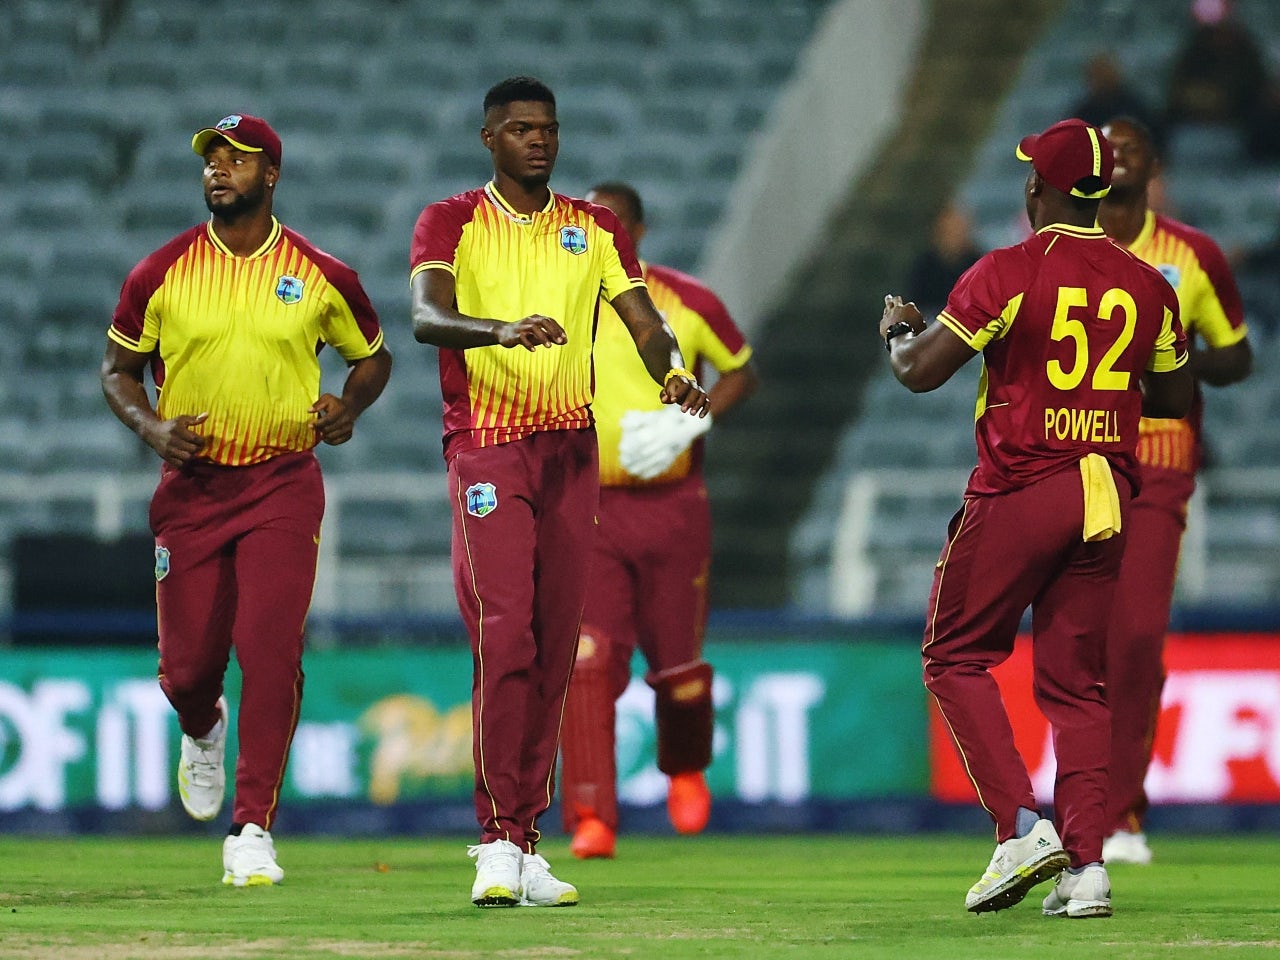 Preview: T20 World Cup: West Indies vs. South Africa - prediction, team news, series so far